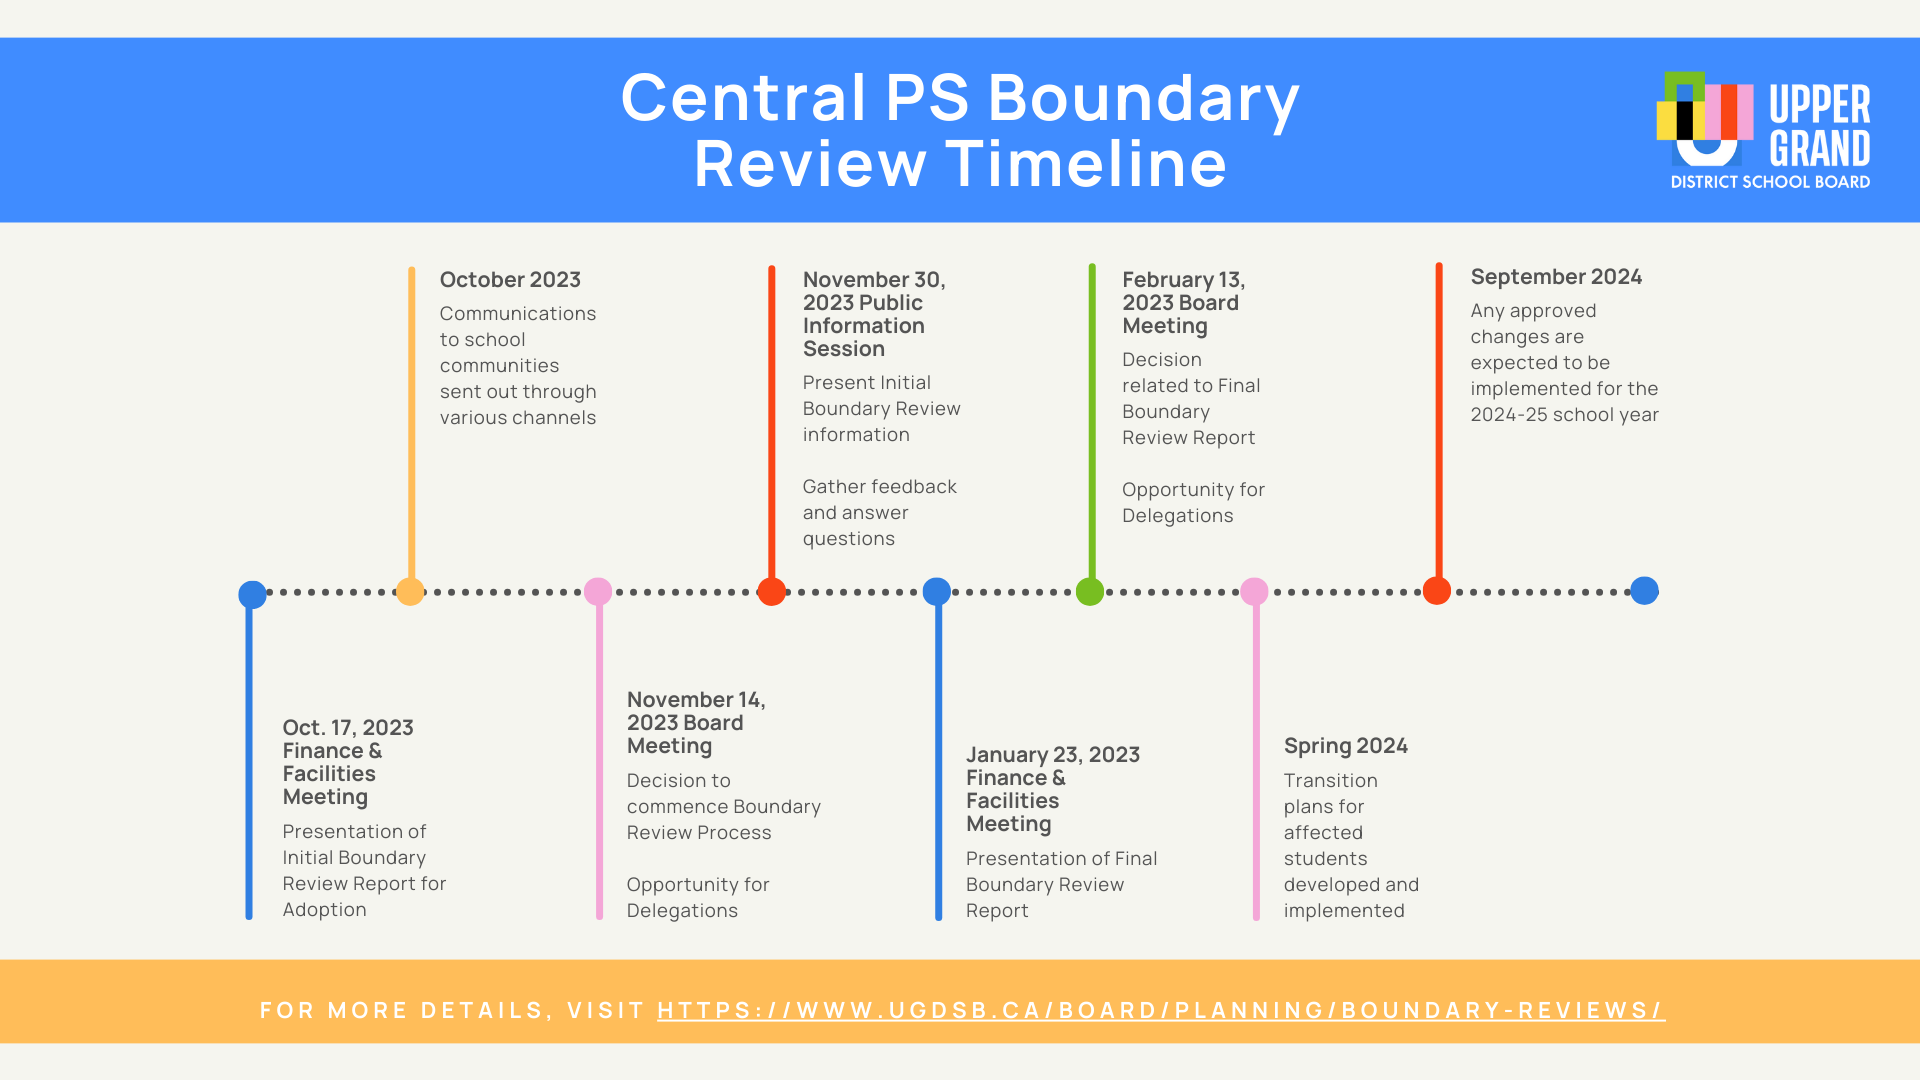 Timeline:
October 17, 2023 Finance & Facilities Meeting
Presentation of Initial Boundary Review Report for Adoption
November 14, 2023 Board Meeting
Decision to commence Boundary Review Process
Opportunity for Delegations
November 30, 2023 Public Information Session
Present Initial Boundary Review information
Gather feedback and answer questions
January 23, 2023 Finance & Facilities Meeting
Presentation of Final Boundary Review Report
February 13, 2023 Board Meeting
Decision related to Final Boundary Review Report
Opportunity for Delegations
Any approved changes are expected to be implemented for the 2024-25 school year.